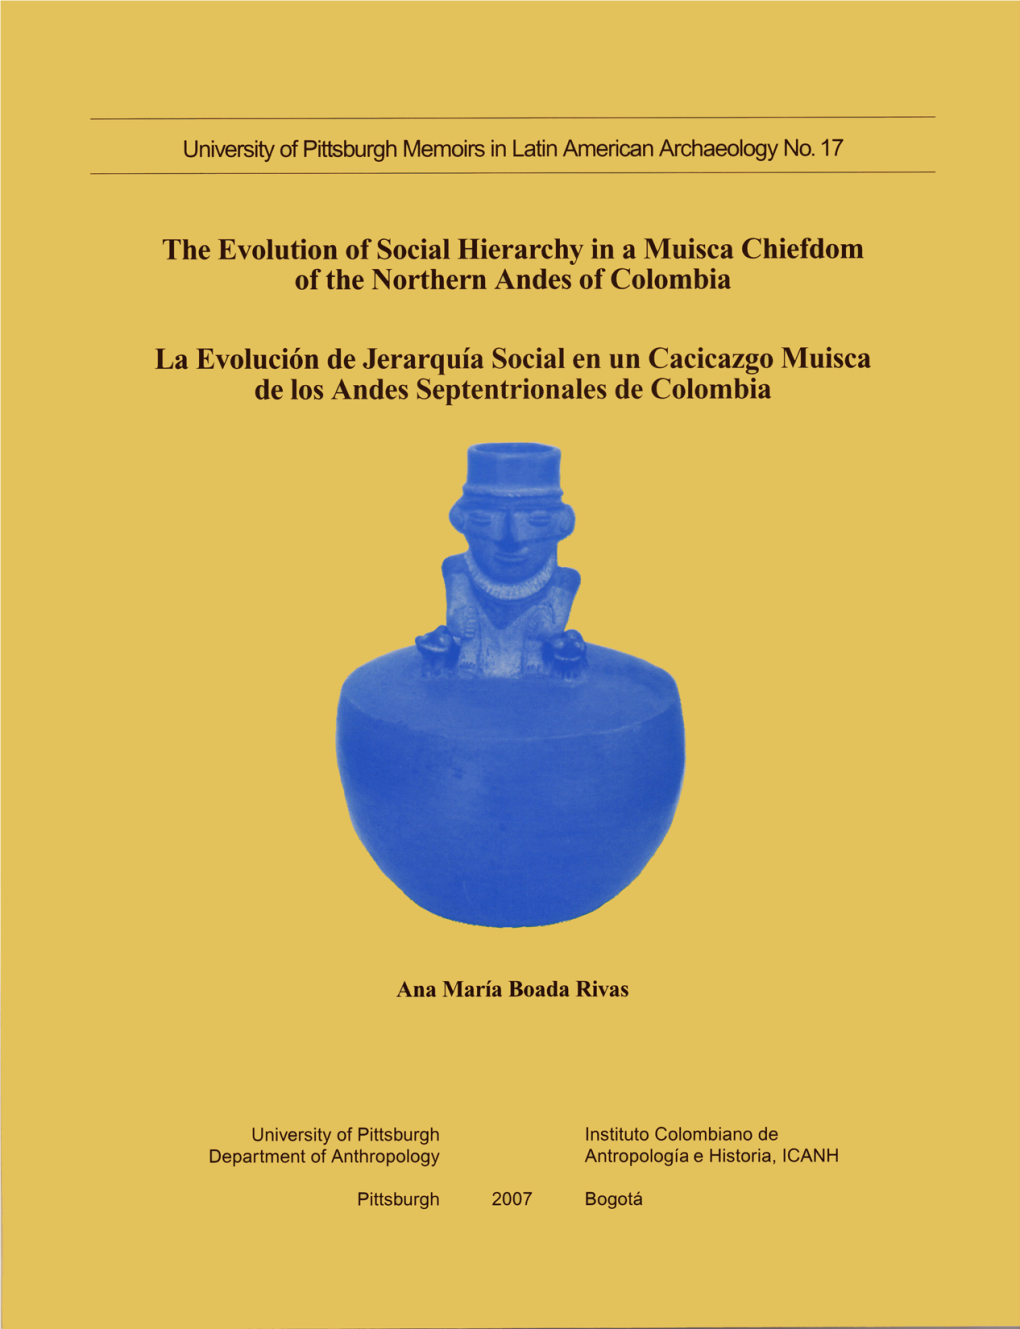 The Evolution of Social Hierarchy in a Muisca Chiefdom of the Northern Andes of Colombia